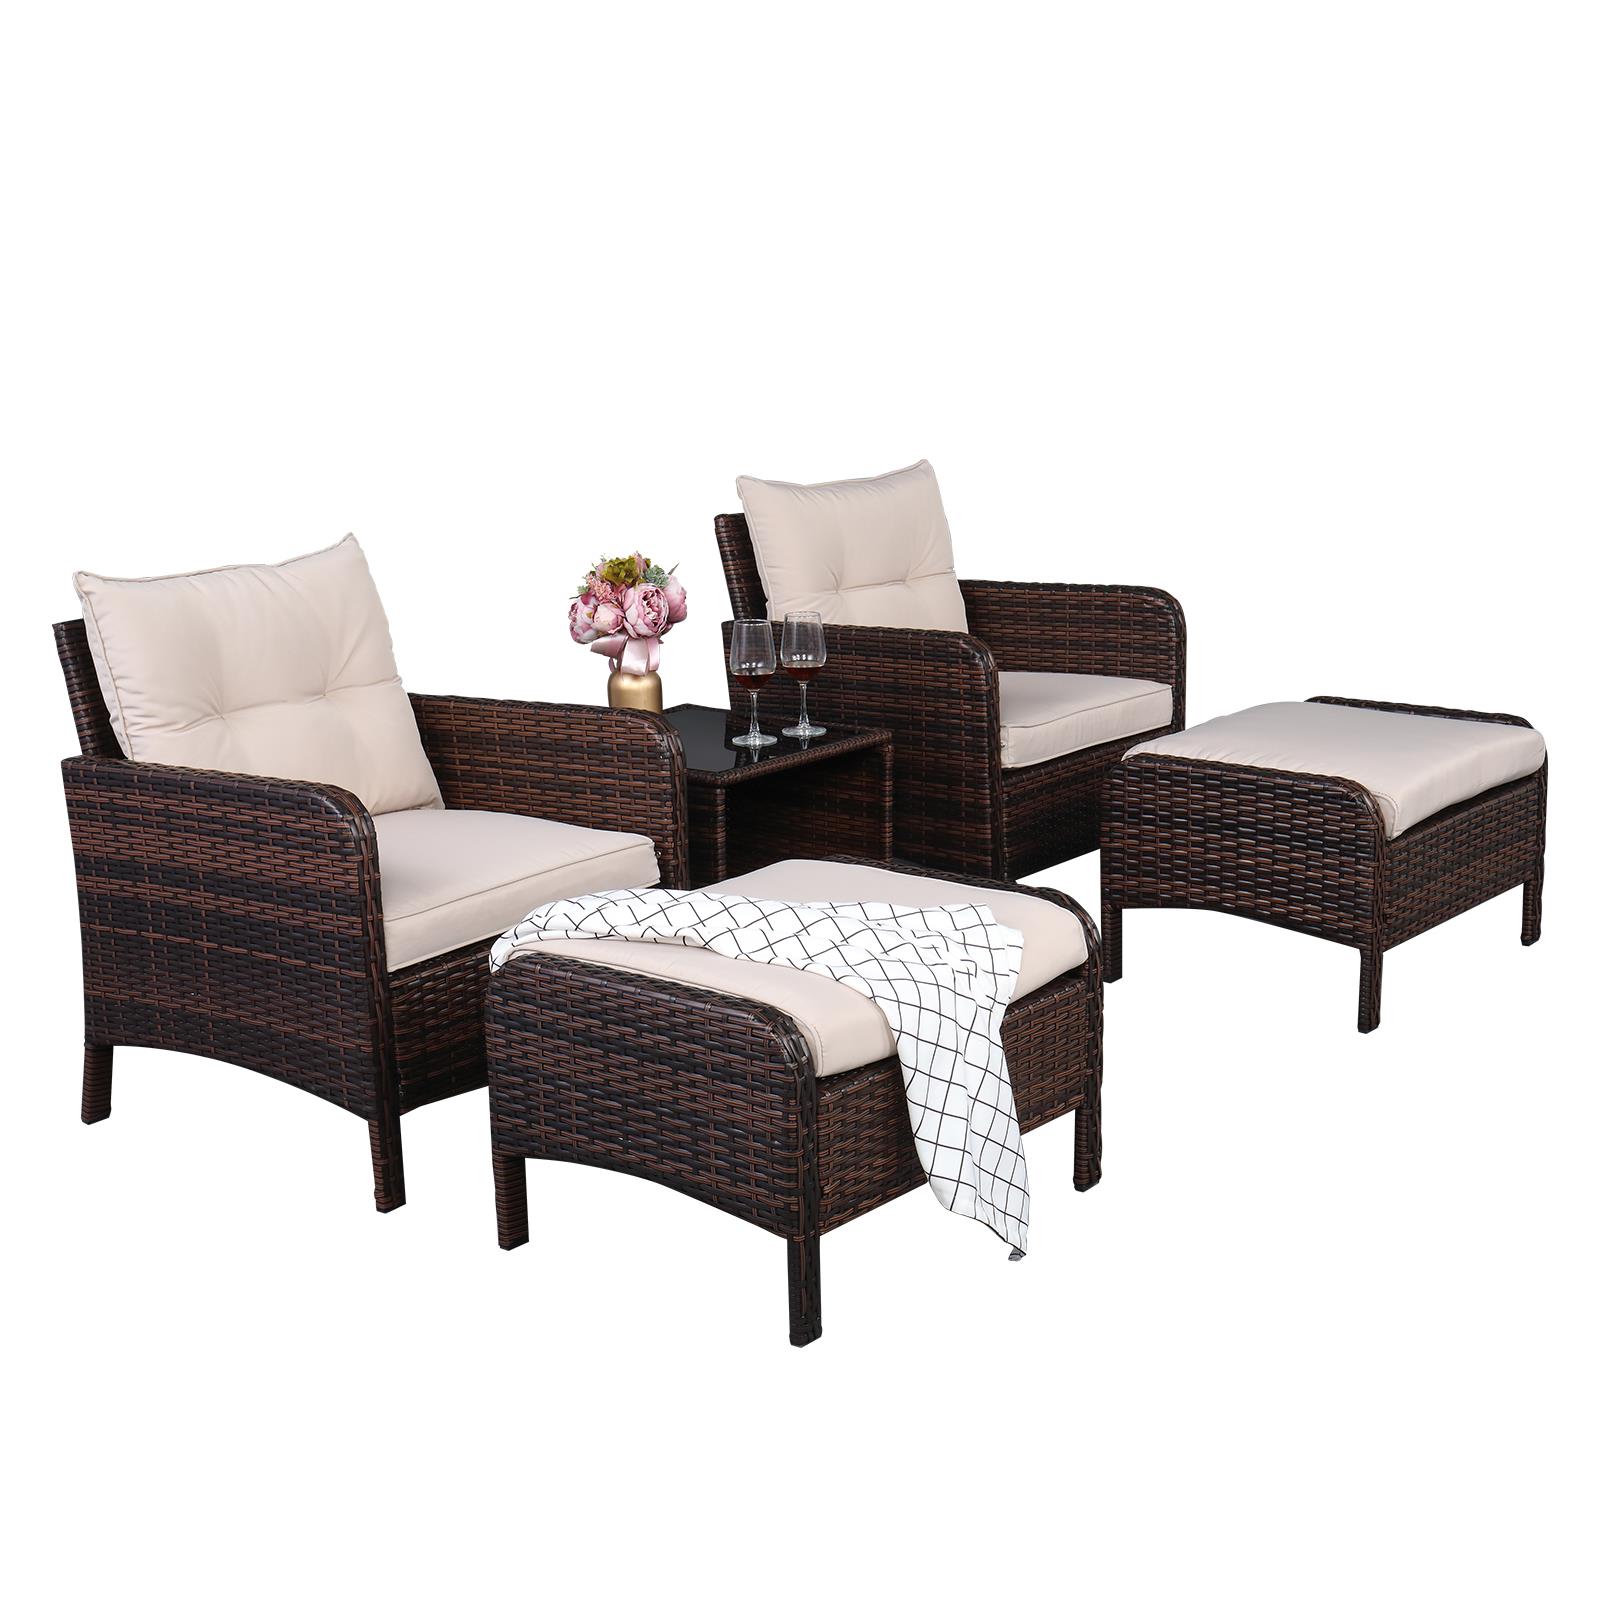 Zimtown 5 Piece Outdoor Patio Furniture Set with Ottomans and Side Table, Iron Frame - image 1 of 11